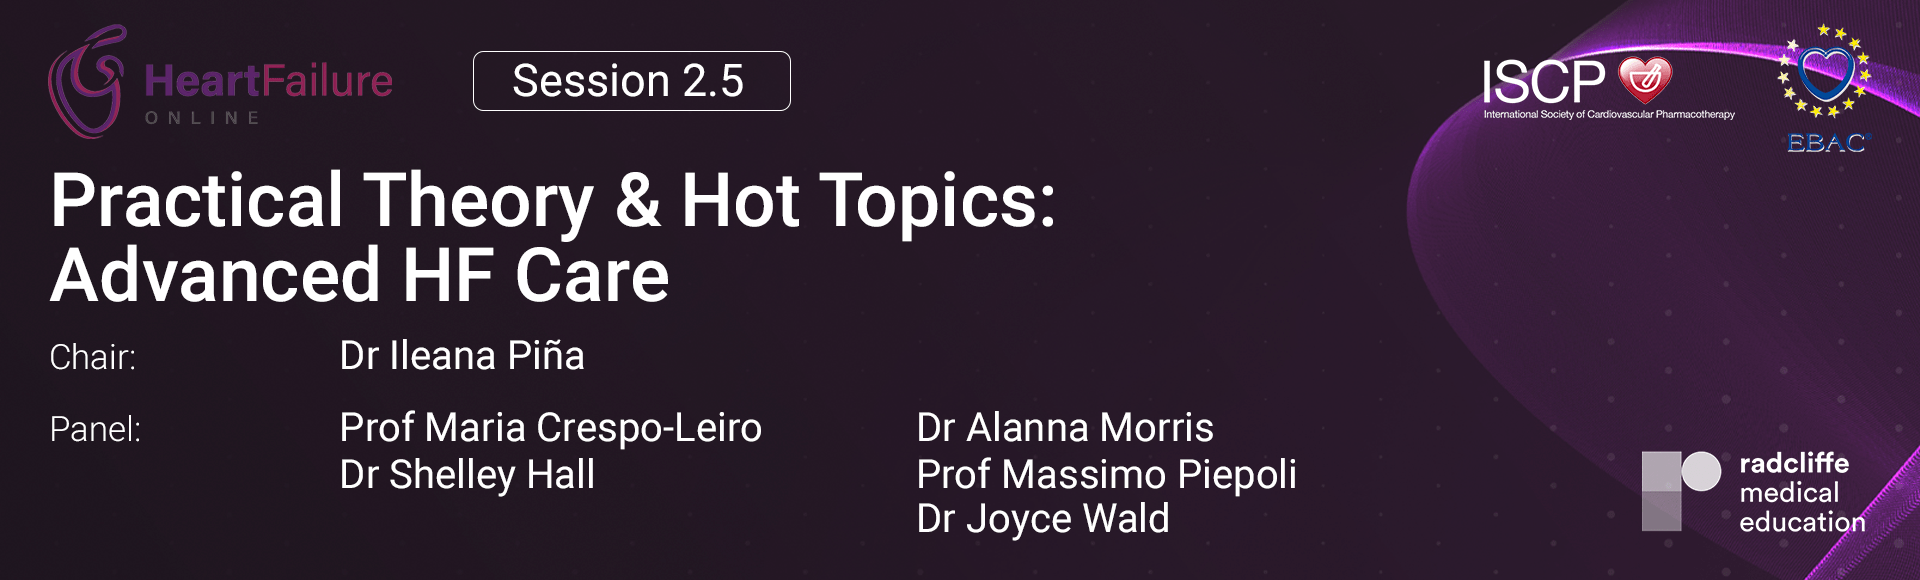 HFO 2022 - Session 2.5 Practical Theory & Hot Topics: Advanced HF Care